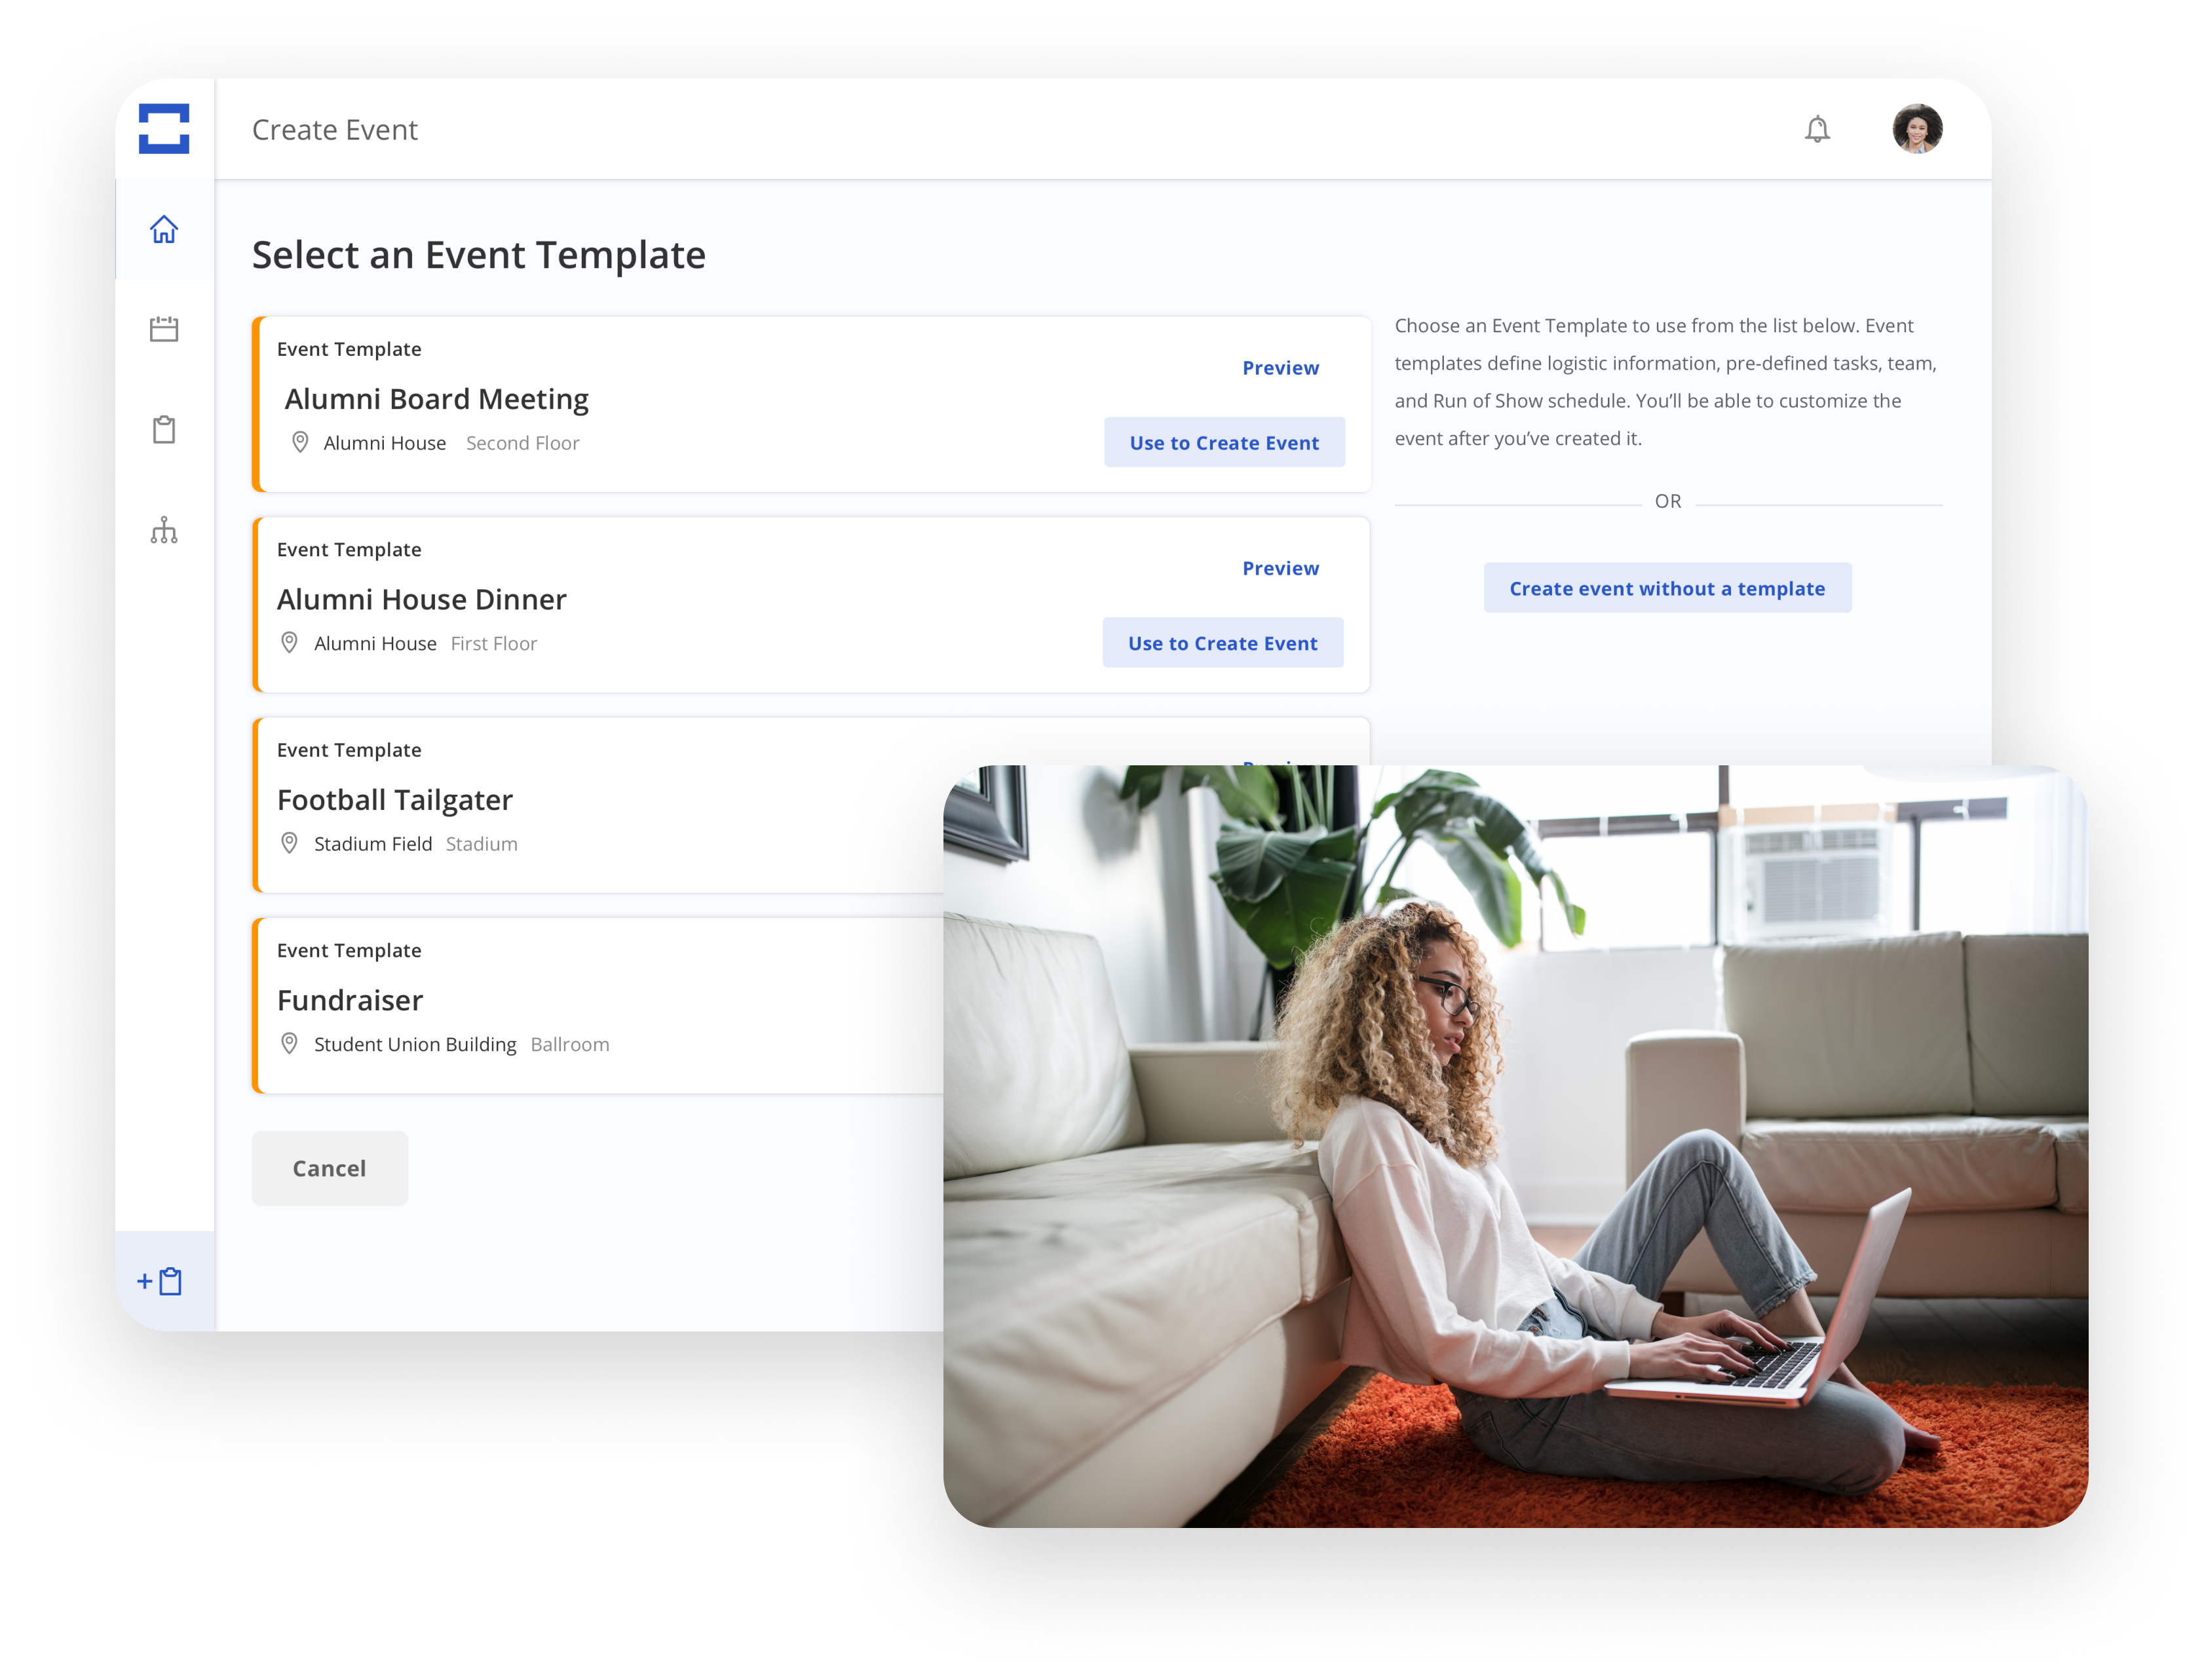 Event creation template screen from Intrevent event management platform next to image of woman sitting on floor of apartment looking at open laptop.